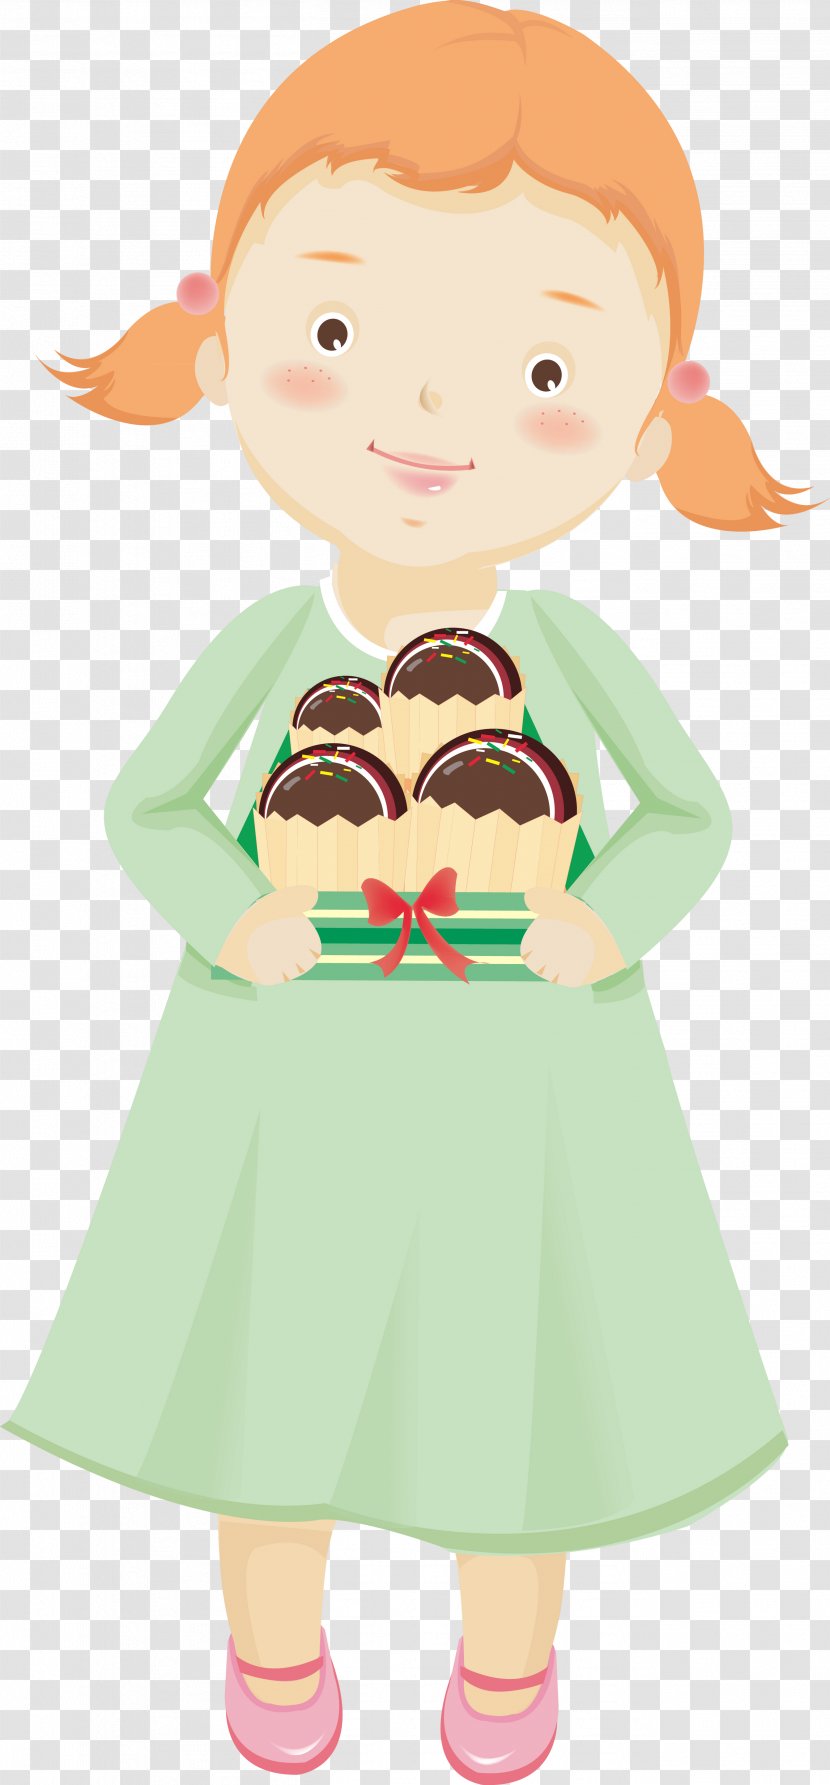 Illustration Vector Graphics Cartoon Image Character - Brown Hair - Child Ecommerce Transparent PNG